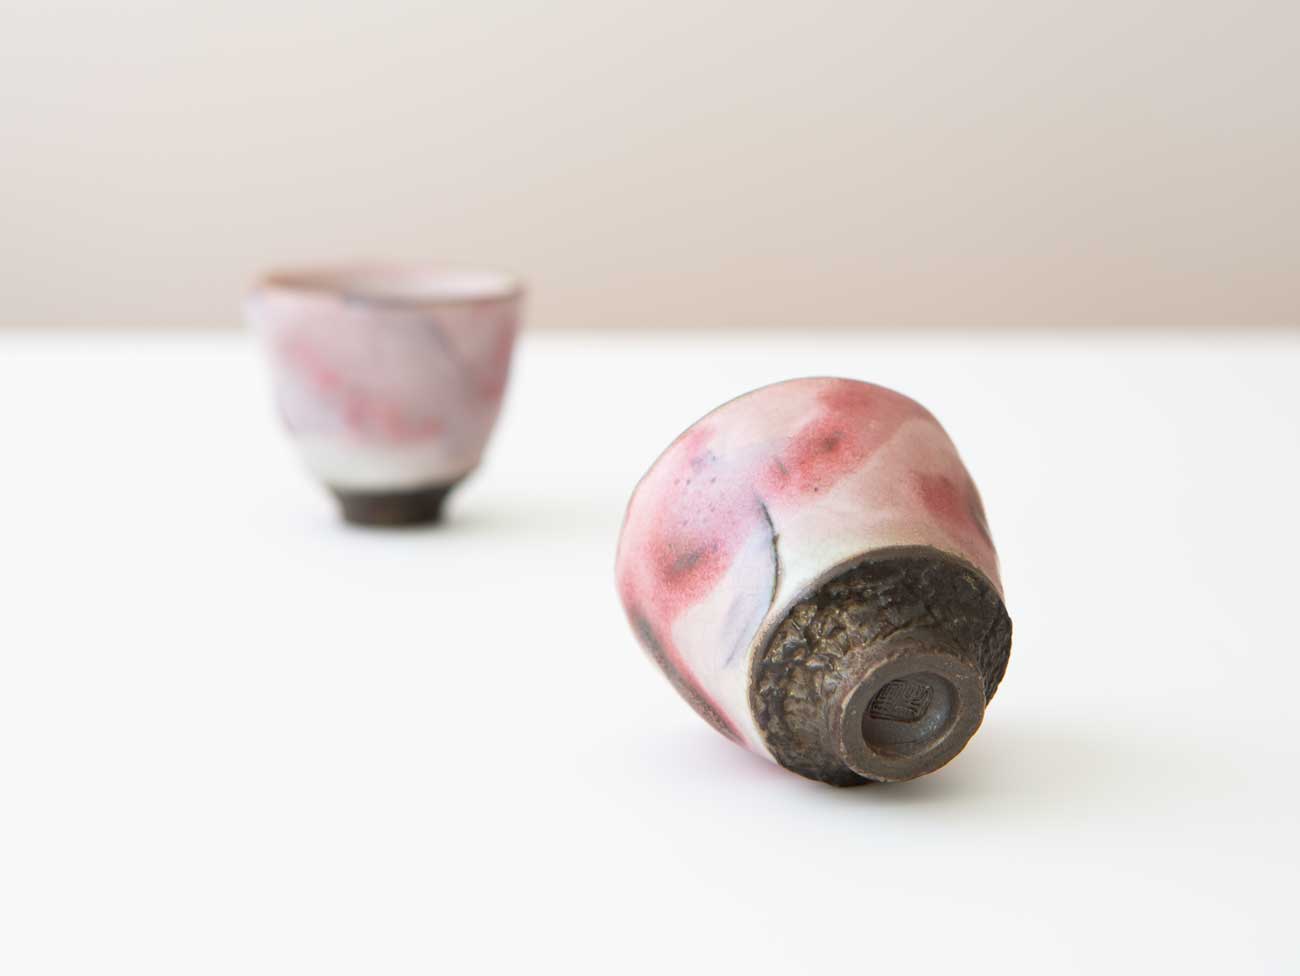 A Pair of Blush Cups. Wood-fired. Shino and Cobalt.